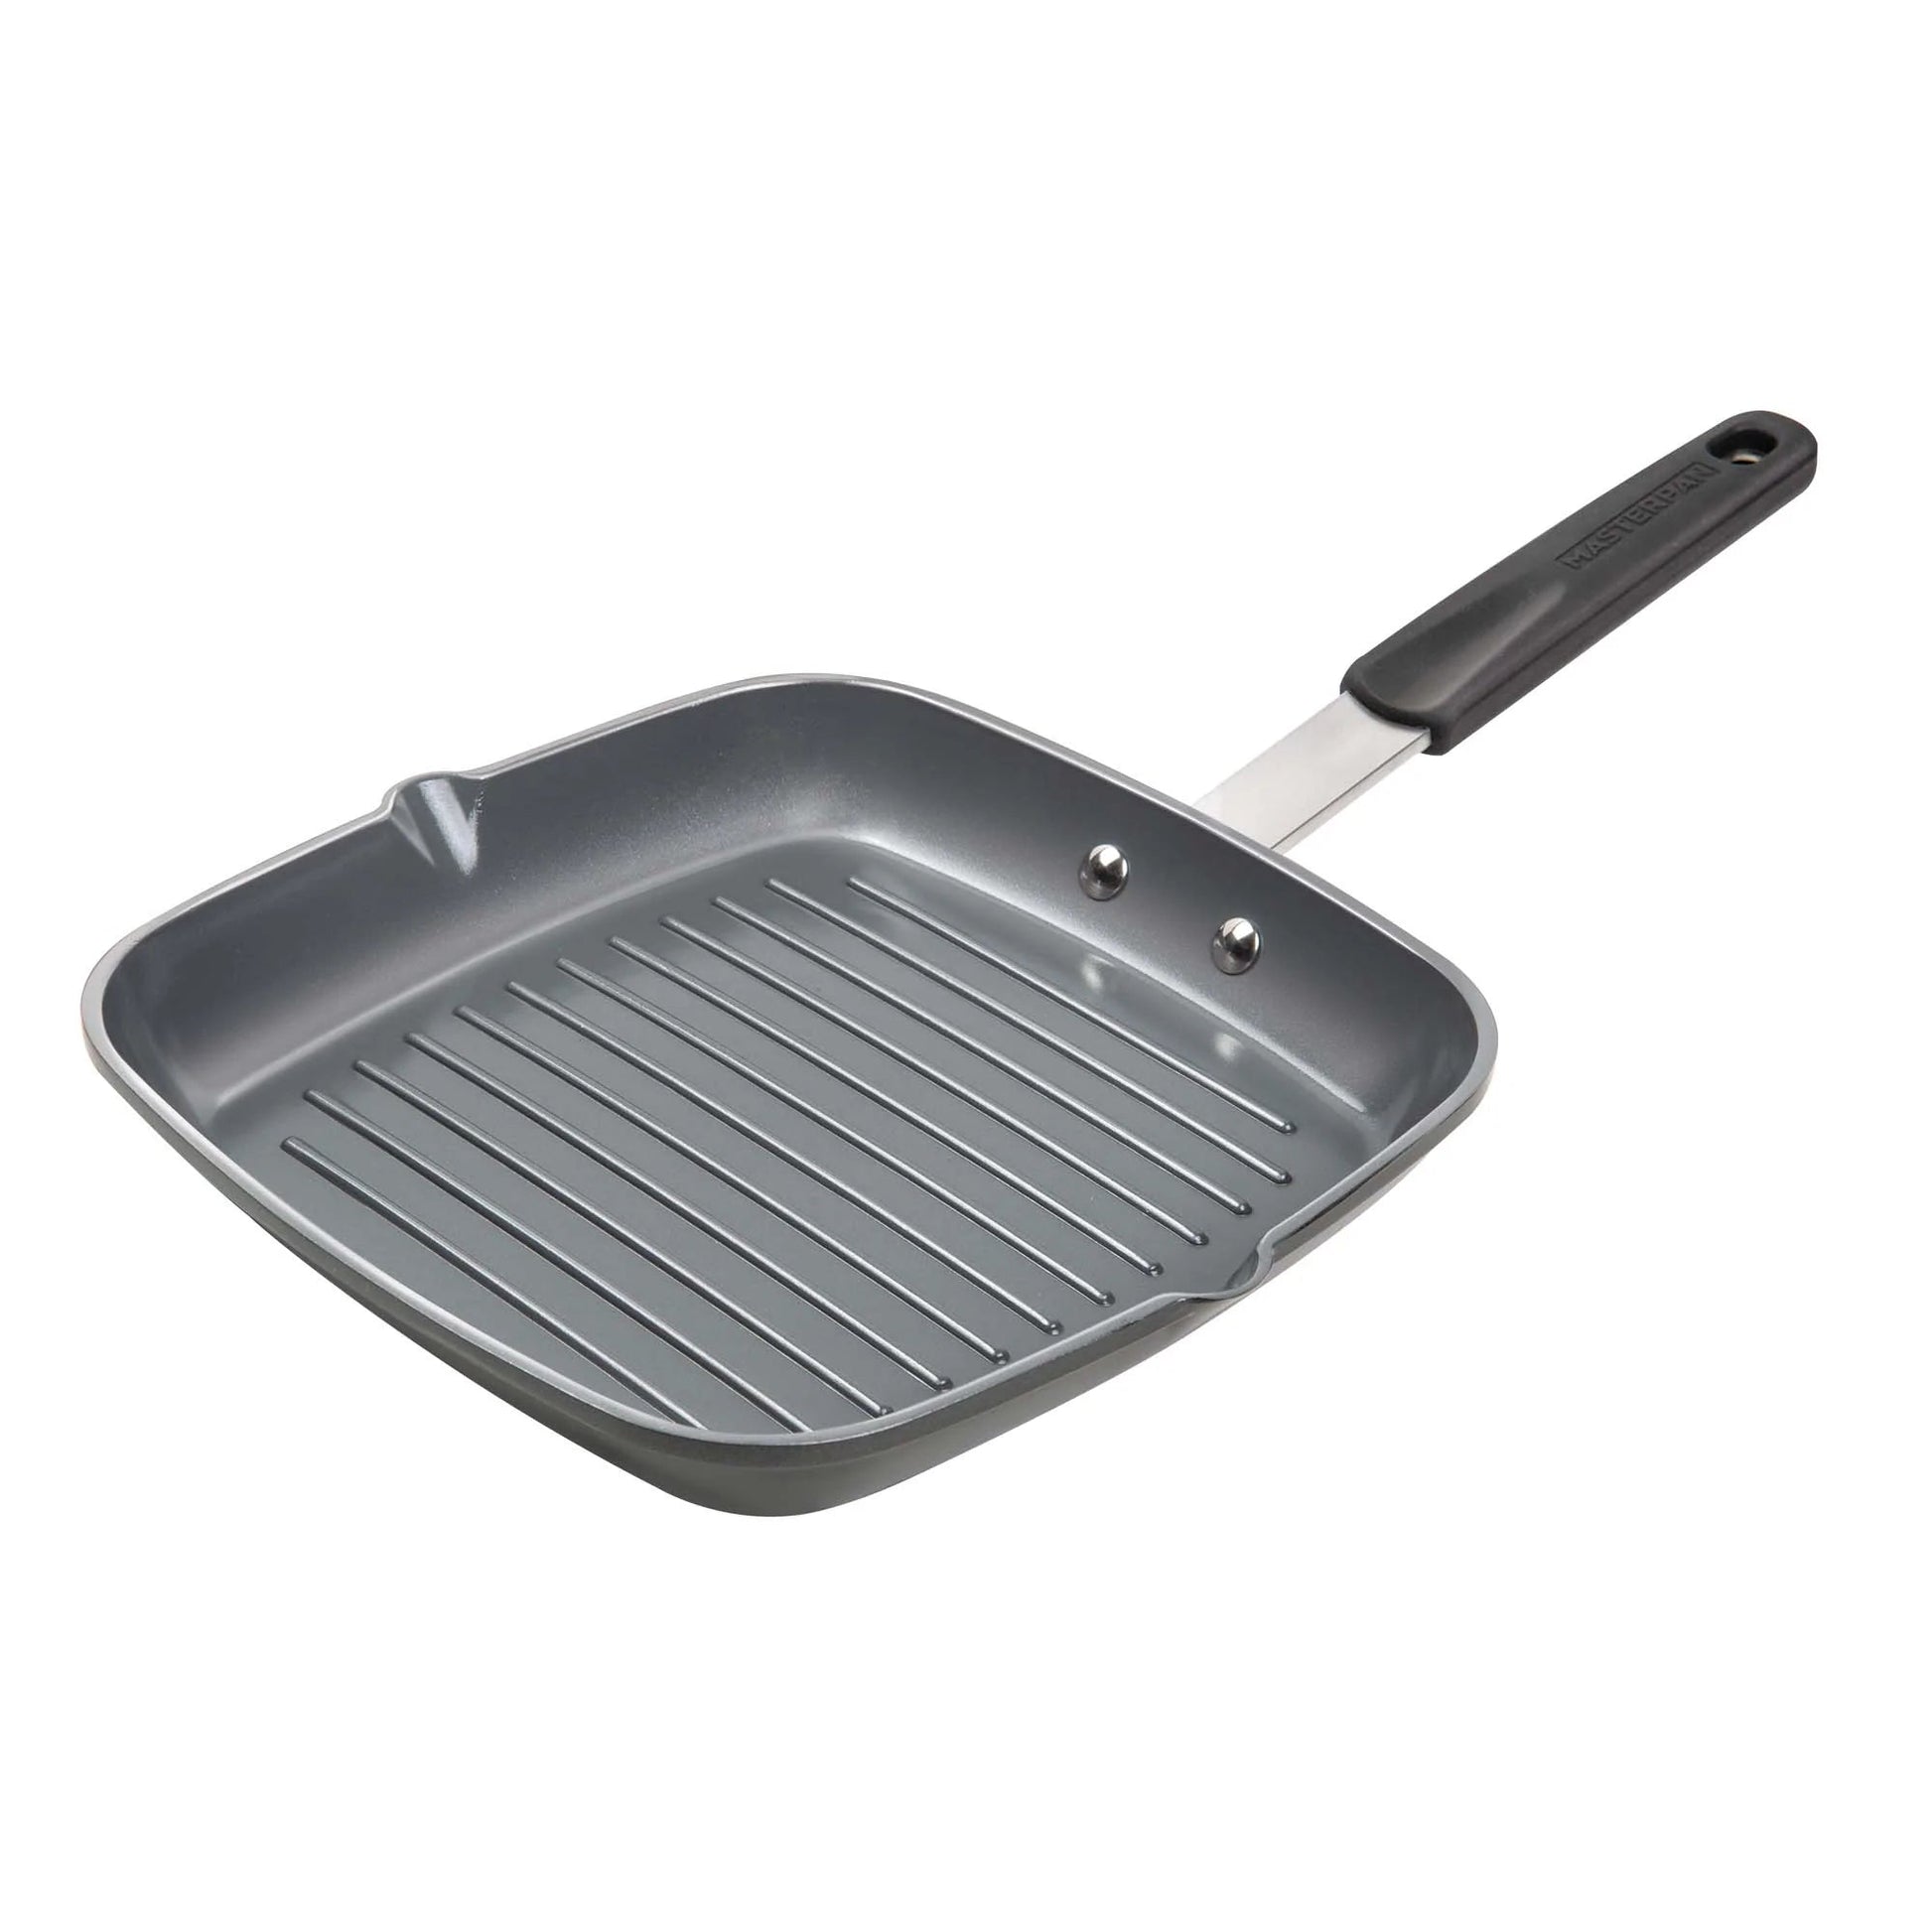 MASTERPAN Chef's Series 10” Grill Pan, Non-stick Aluminum Cookware With Stainless Steel Chef’s Handle